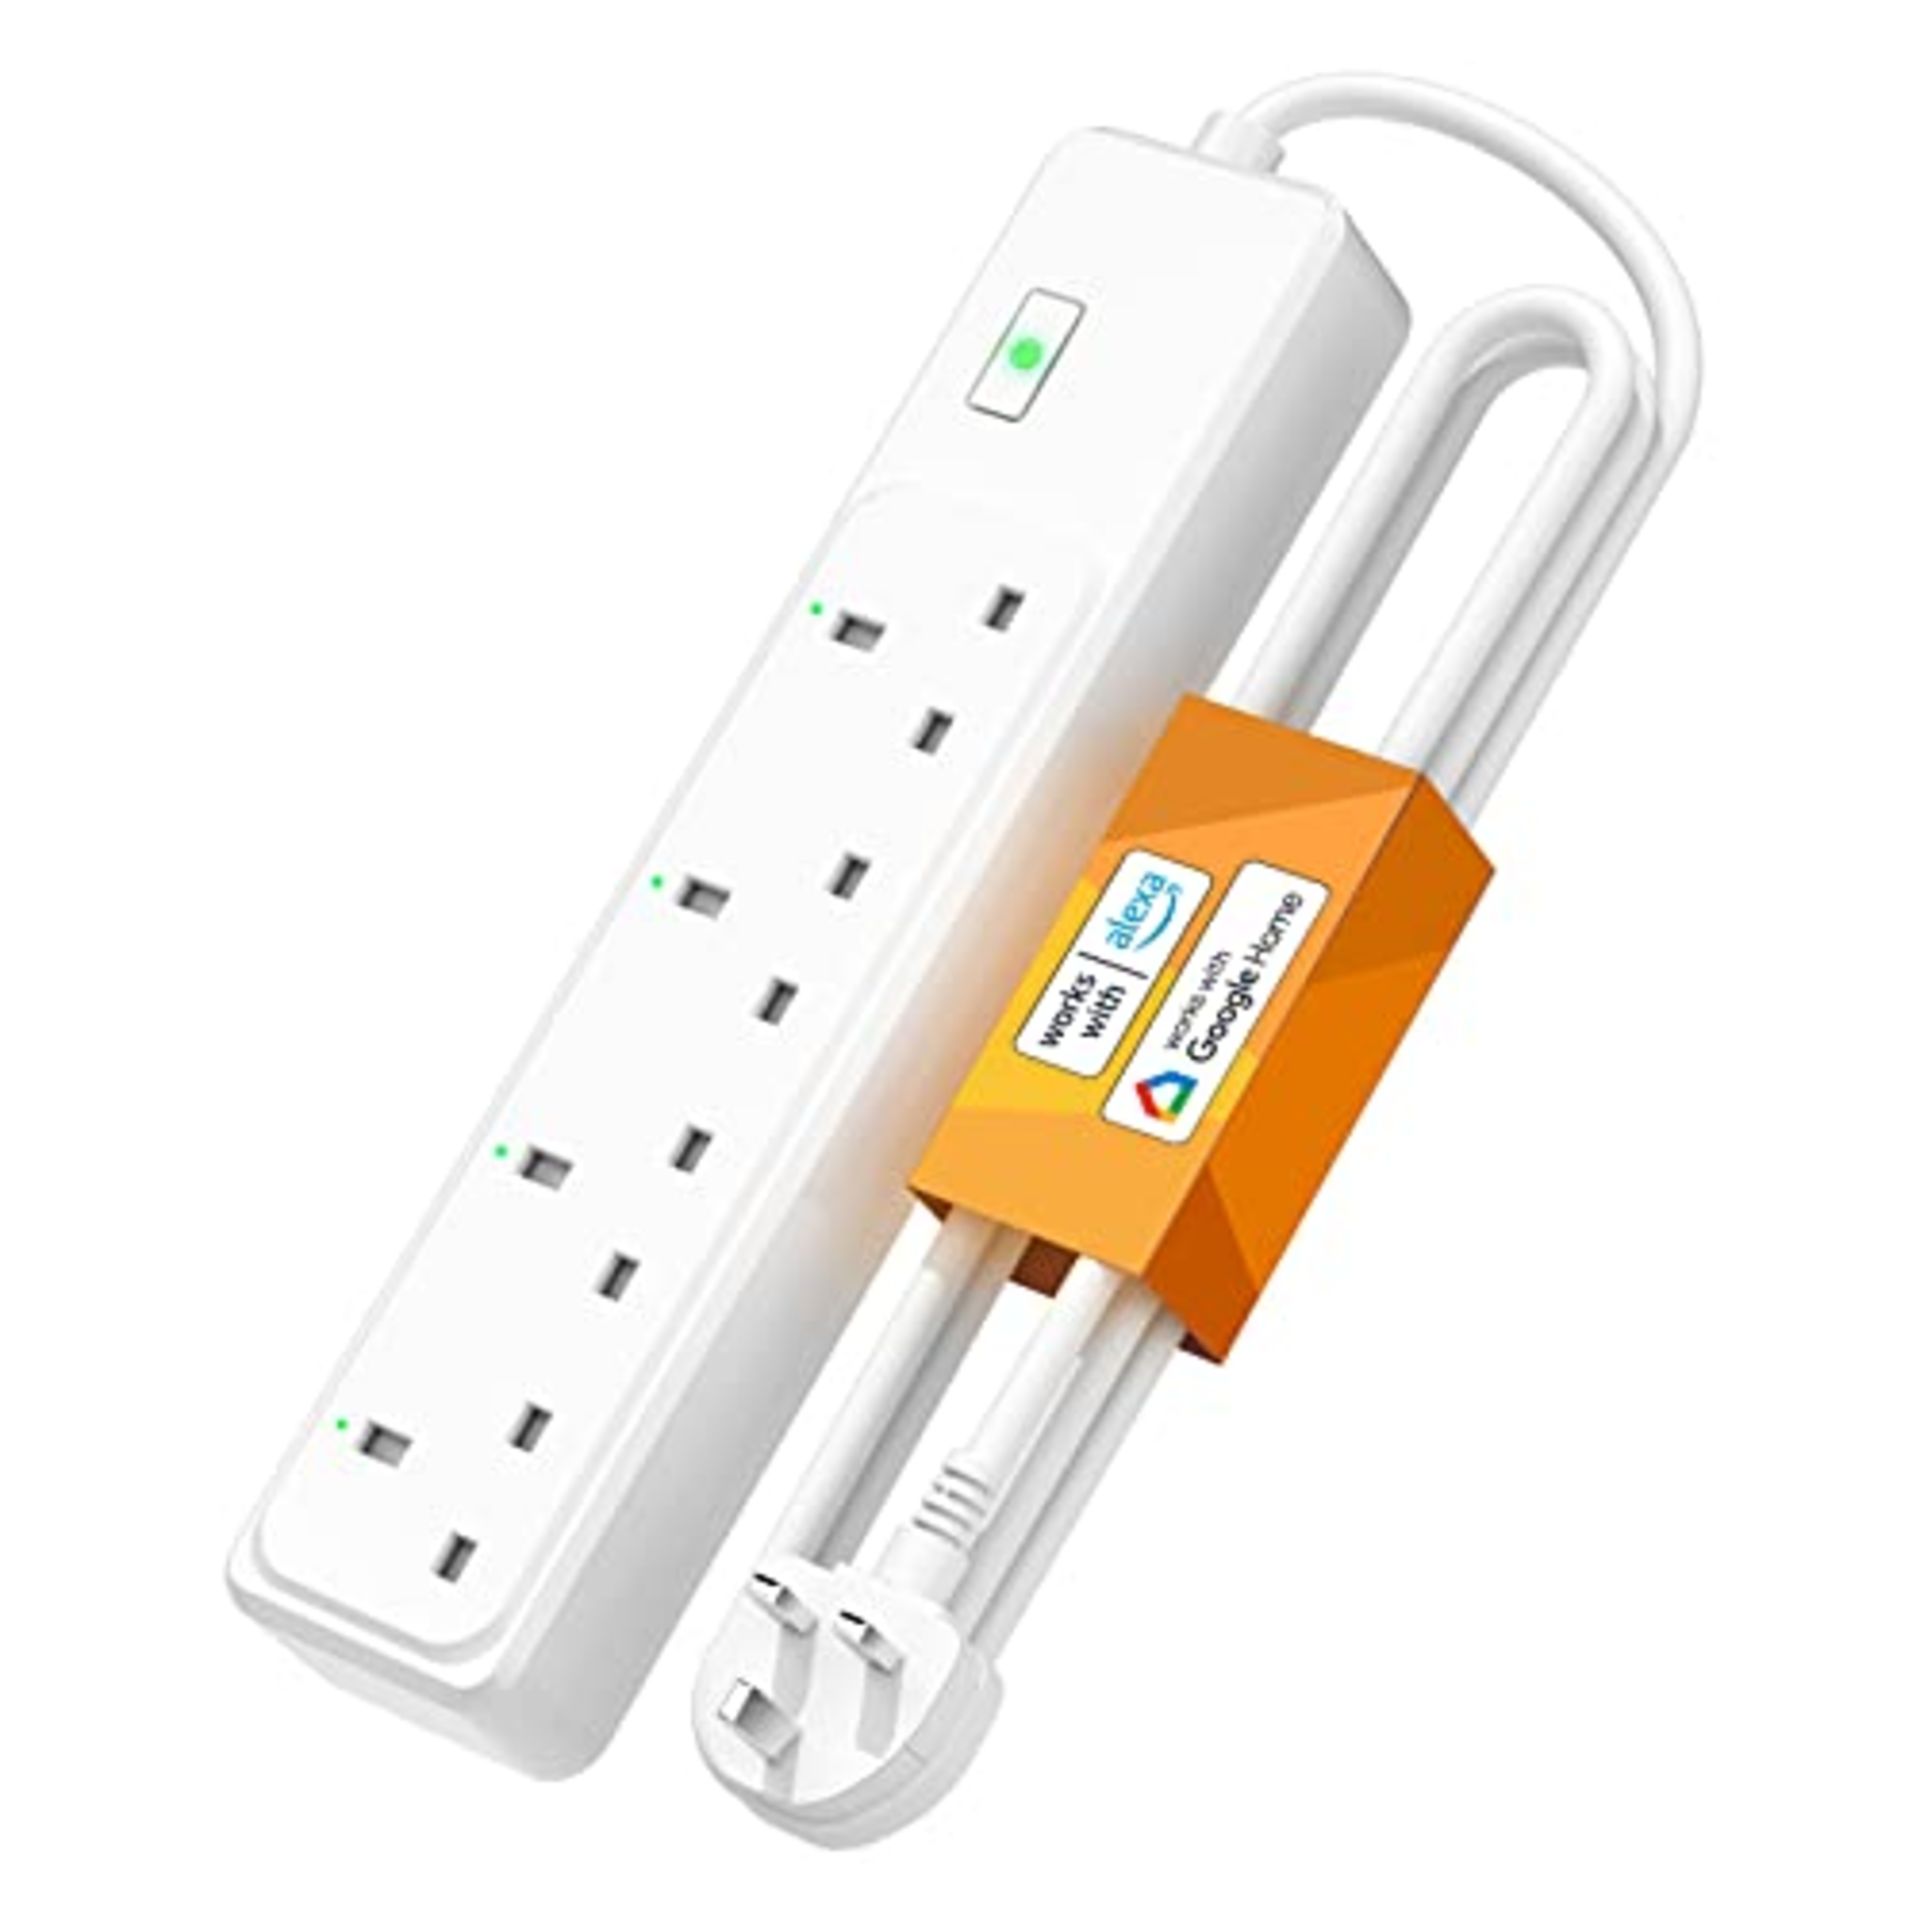 Smart Power Strip WiFi Plug - Smart Outlets Smart Extension Lead 1.8m with 4 AC Outlet